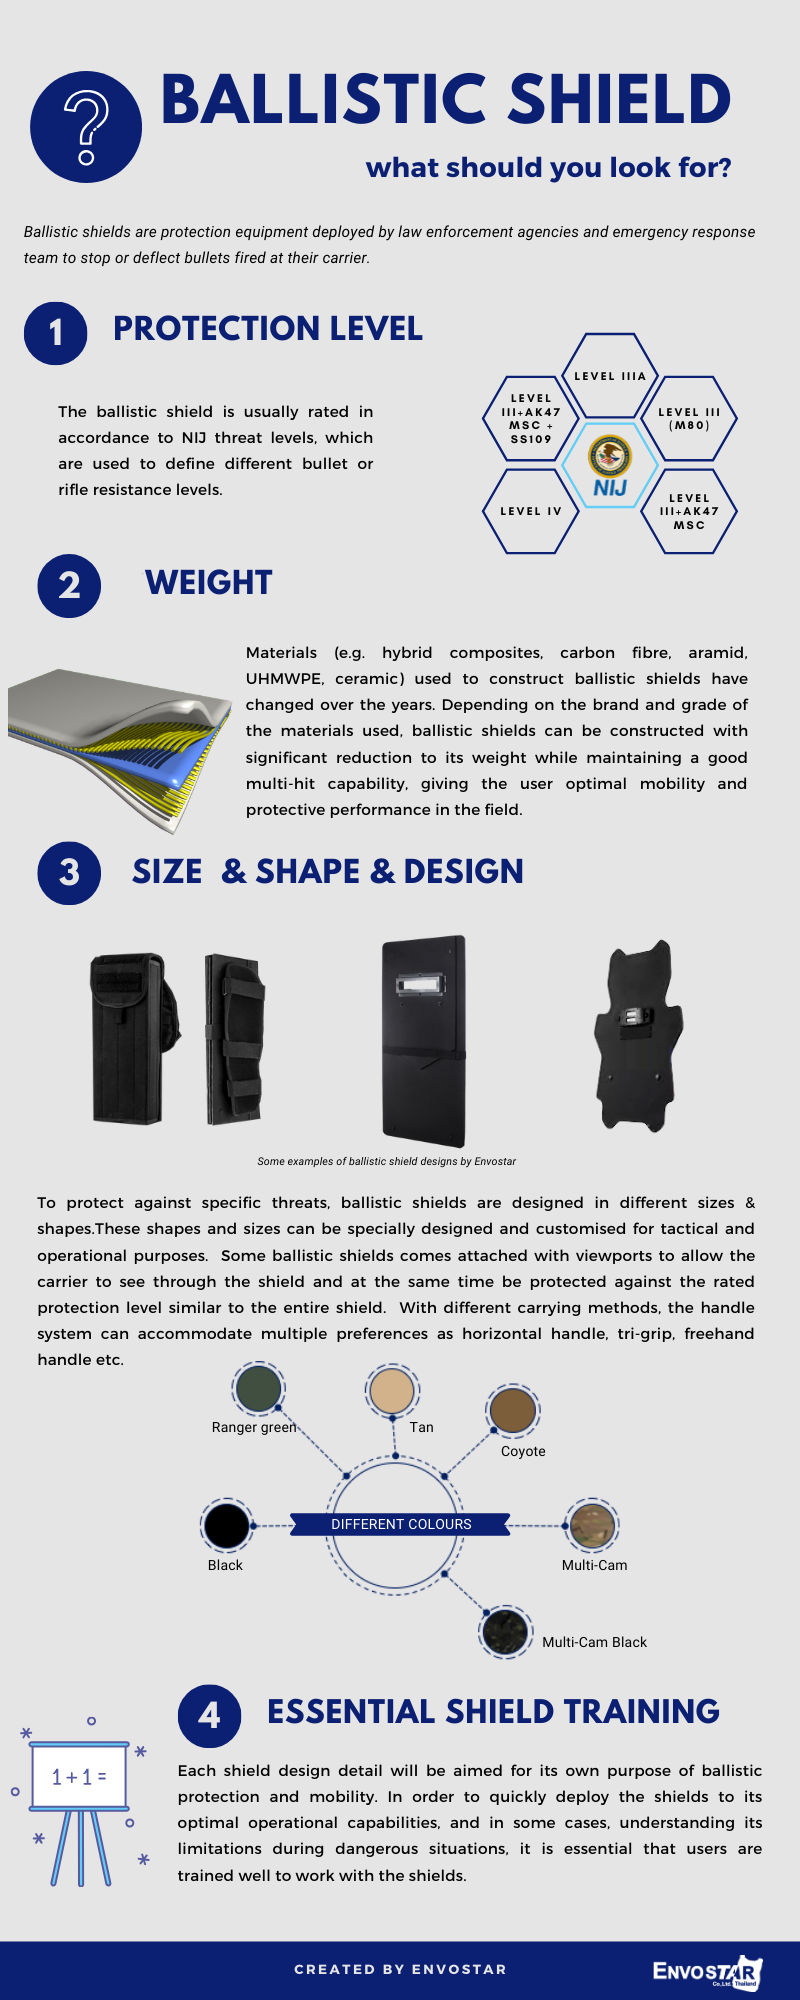 http://envomilitary.com/wp-content/uploads/2020/06/What-should-you-look-for-about-ballistic-shield-.png